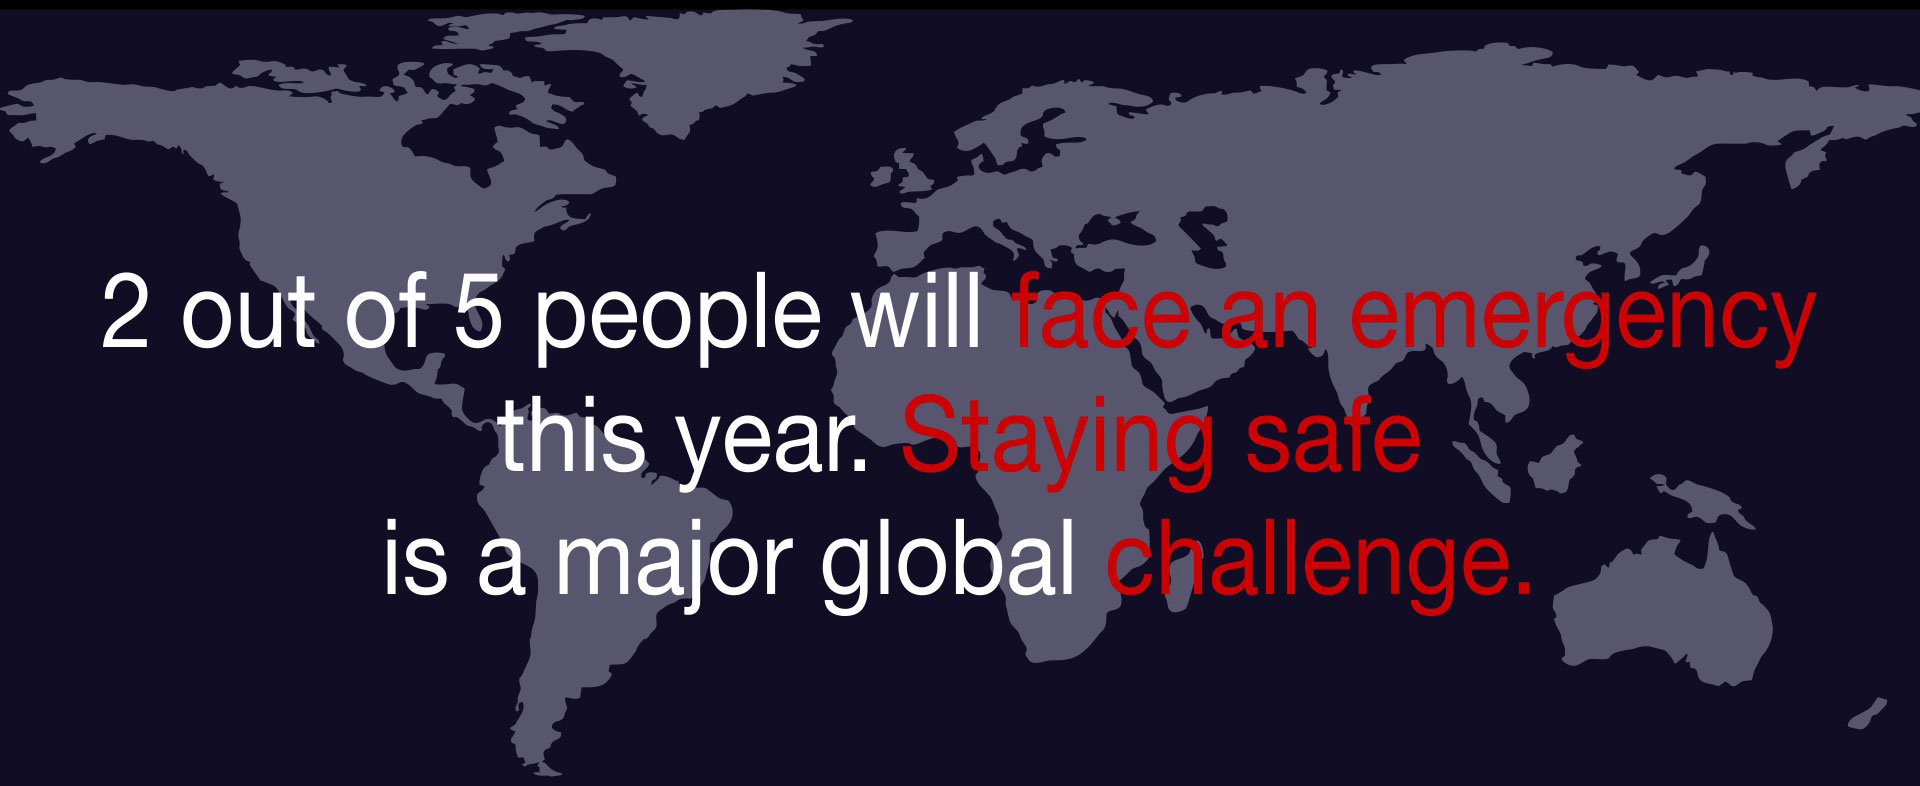 2 out of 5 people will face an emergency this year. Staying safe is a major global challenge.